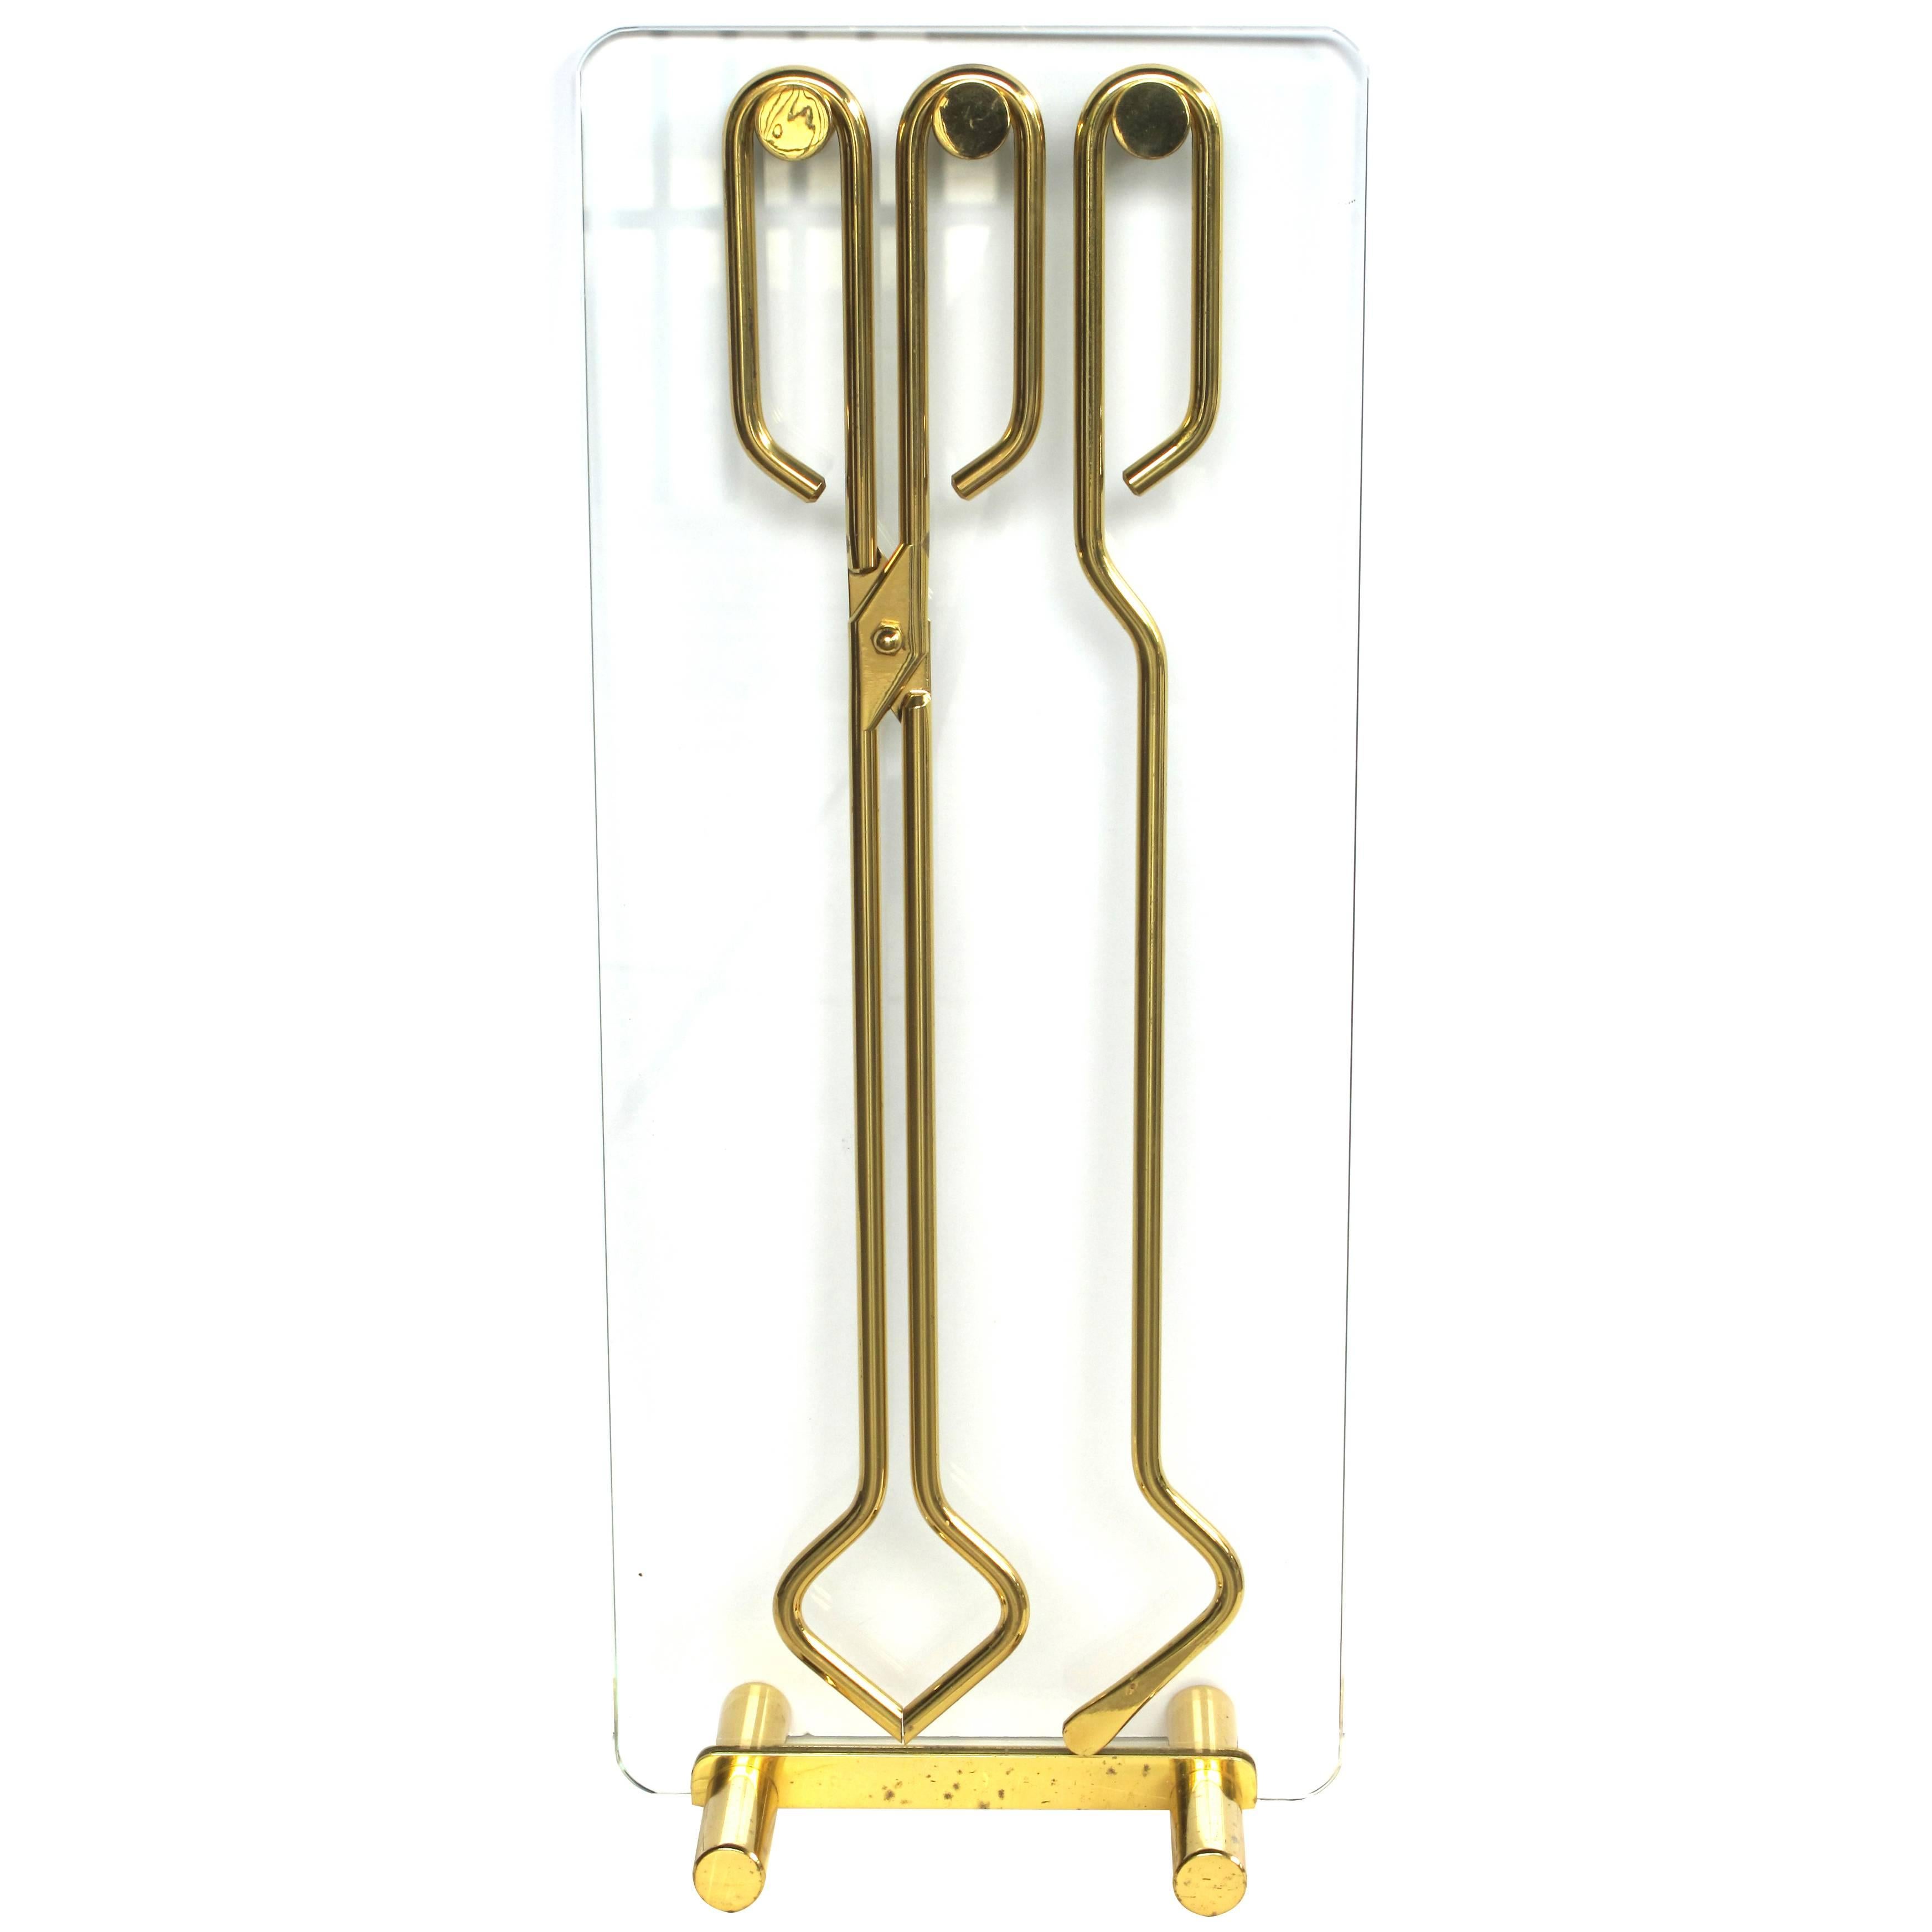 Stylish French Gilt-Metal and Glass Fire-Tool Set, Manner of Jacques Adnet